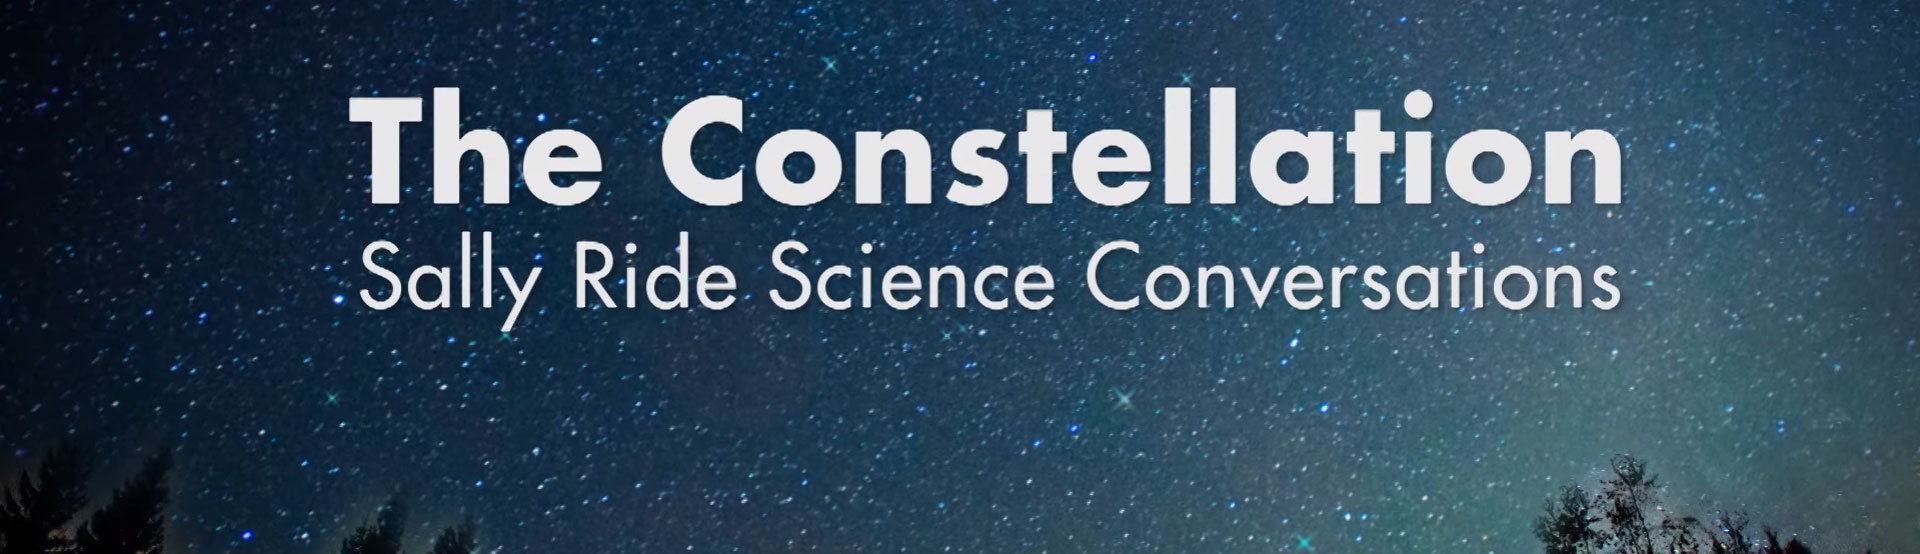 The Constellation: Sally Ride Science Conversations